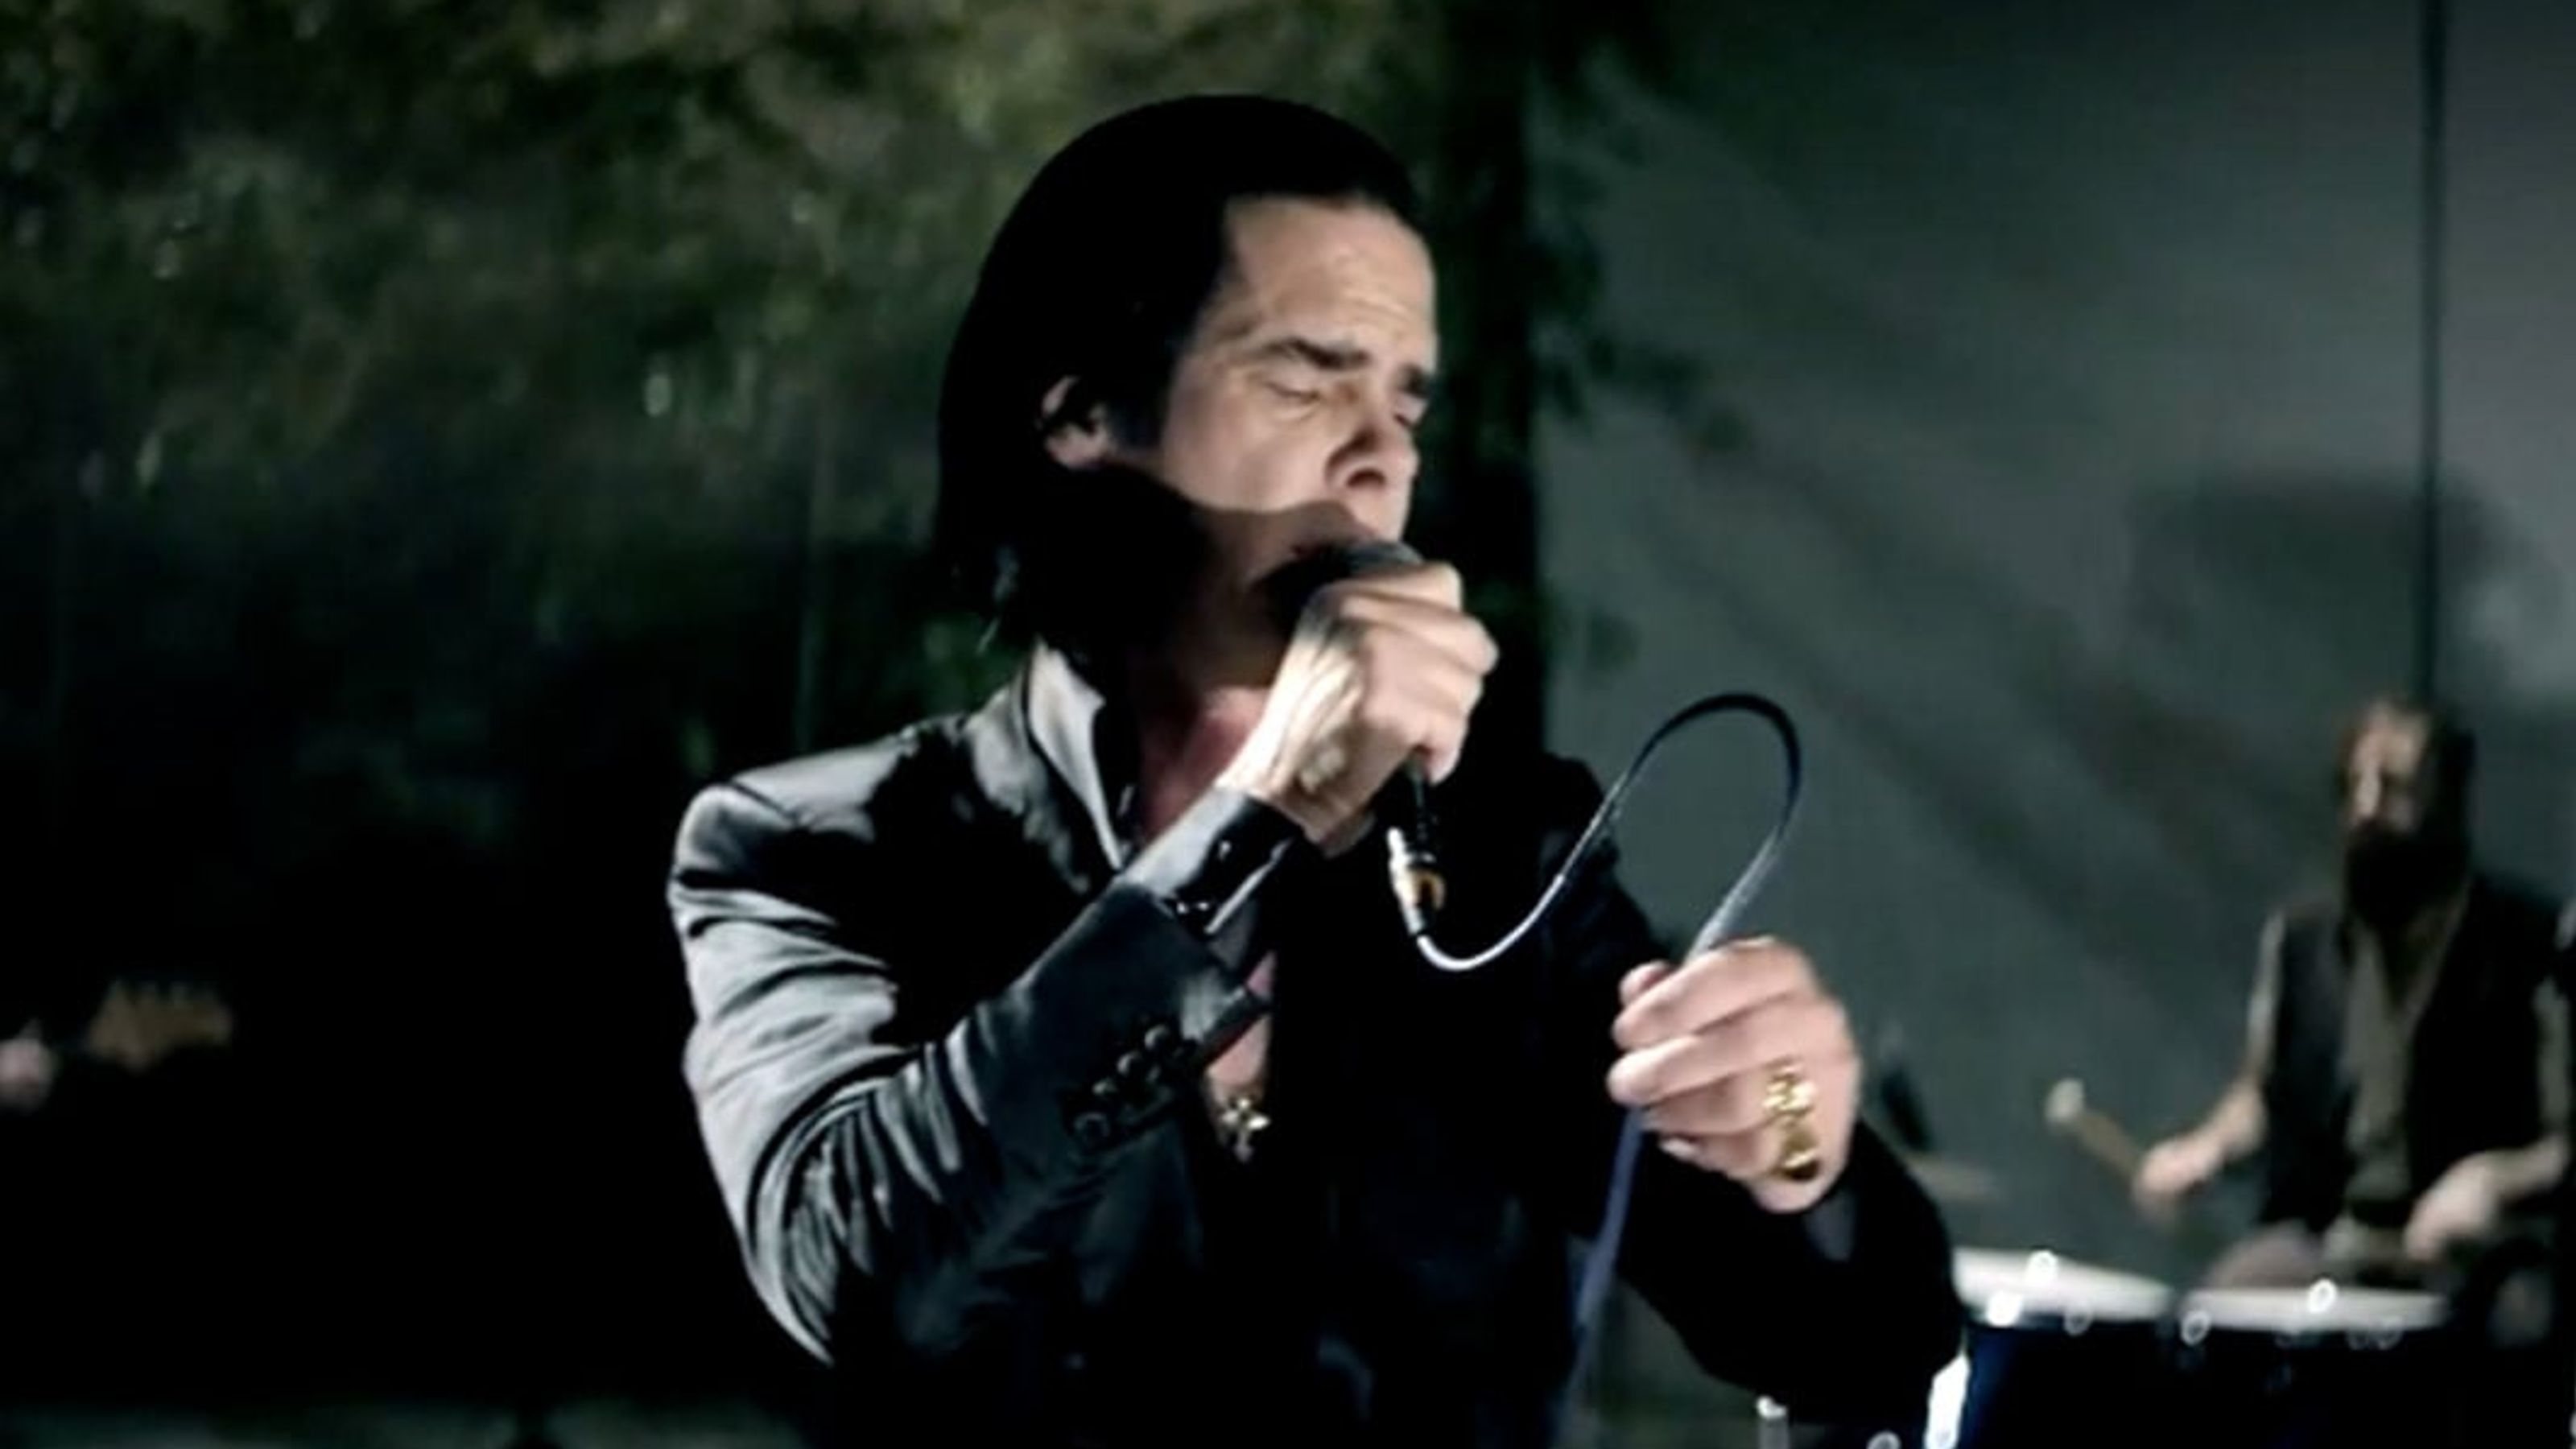 Nick Cave & the Bad Seeds “Higgs Boson Blues”